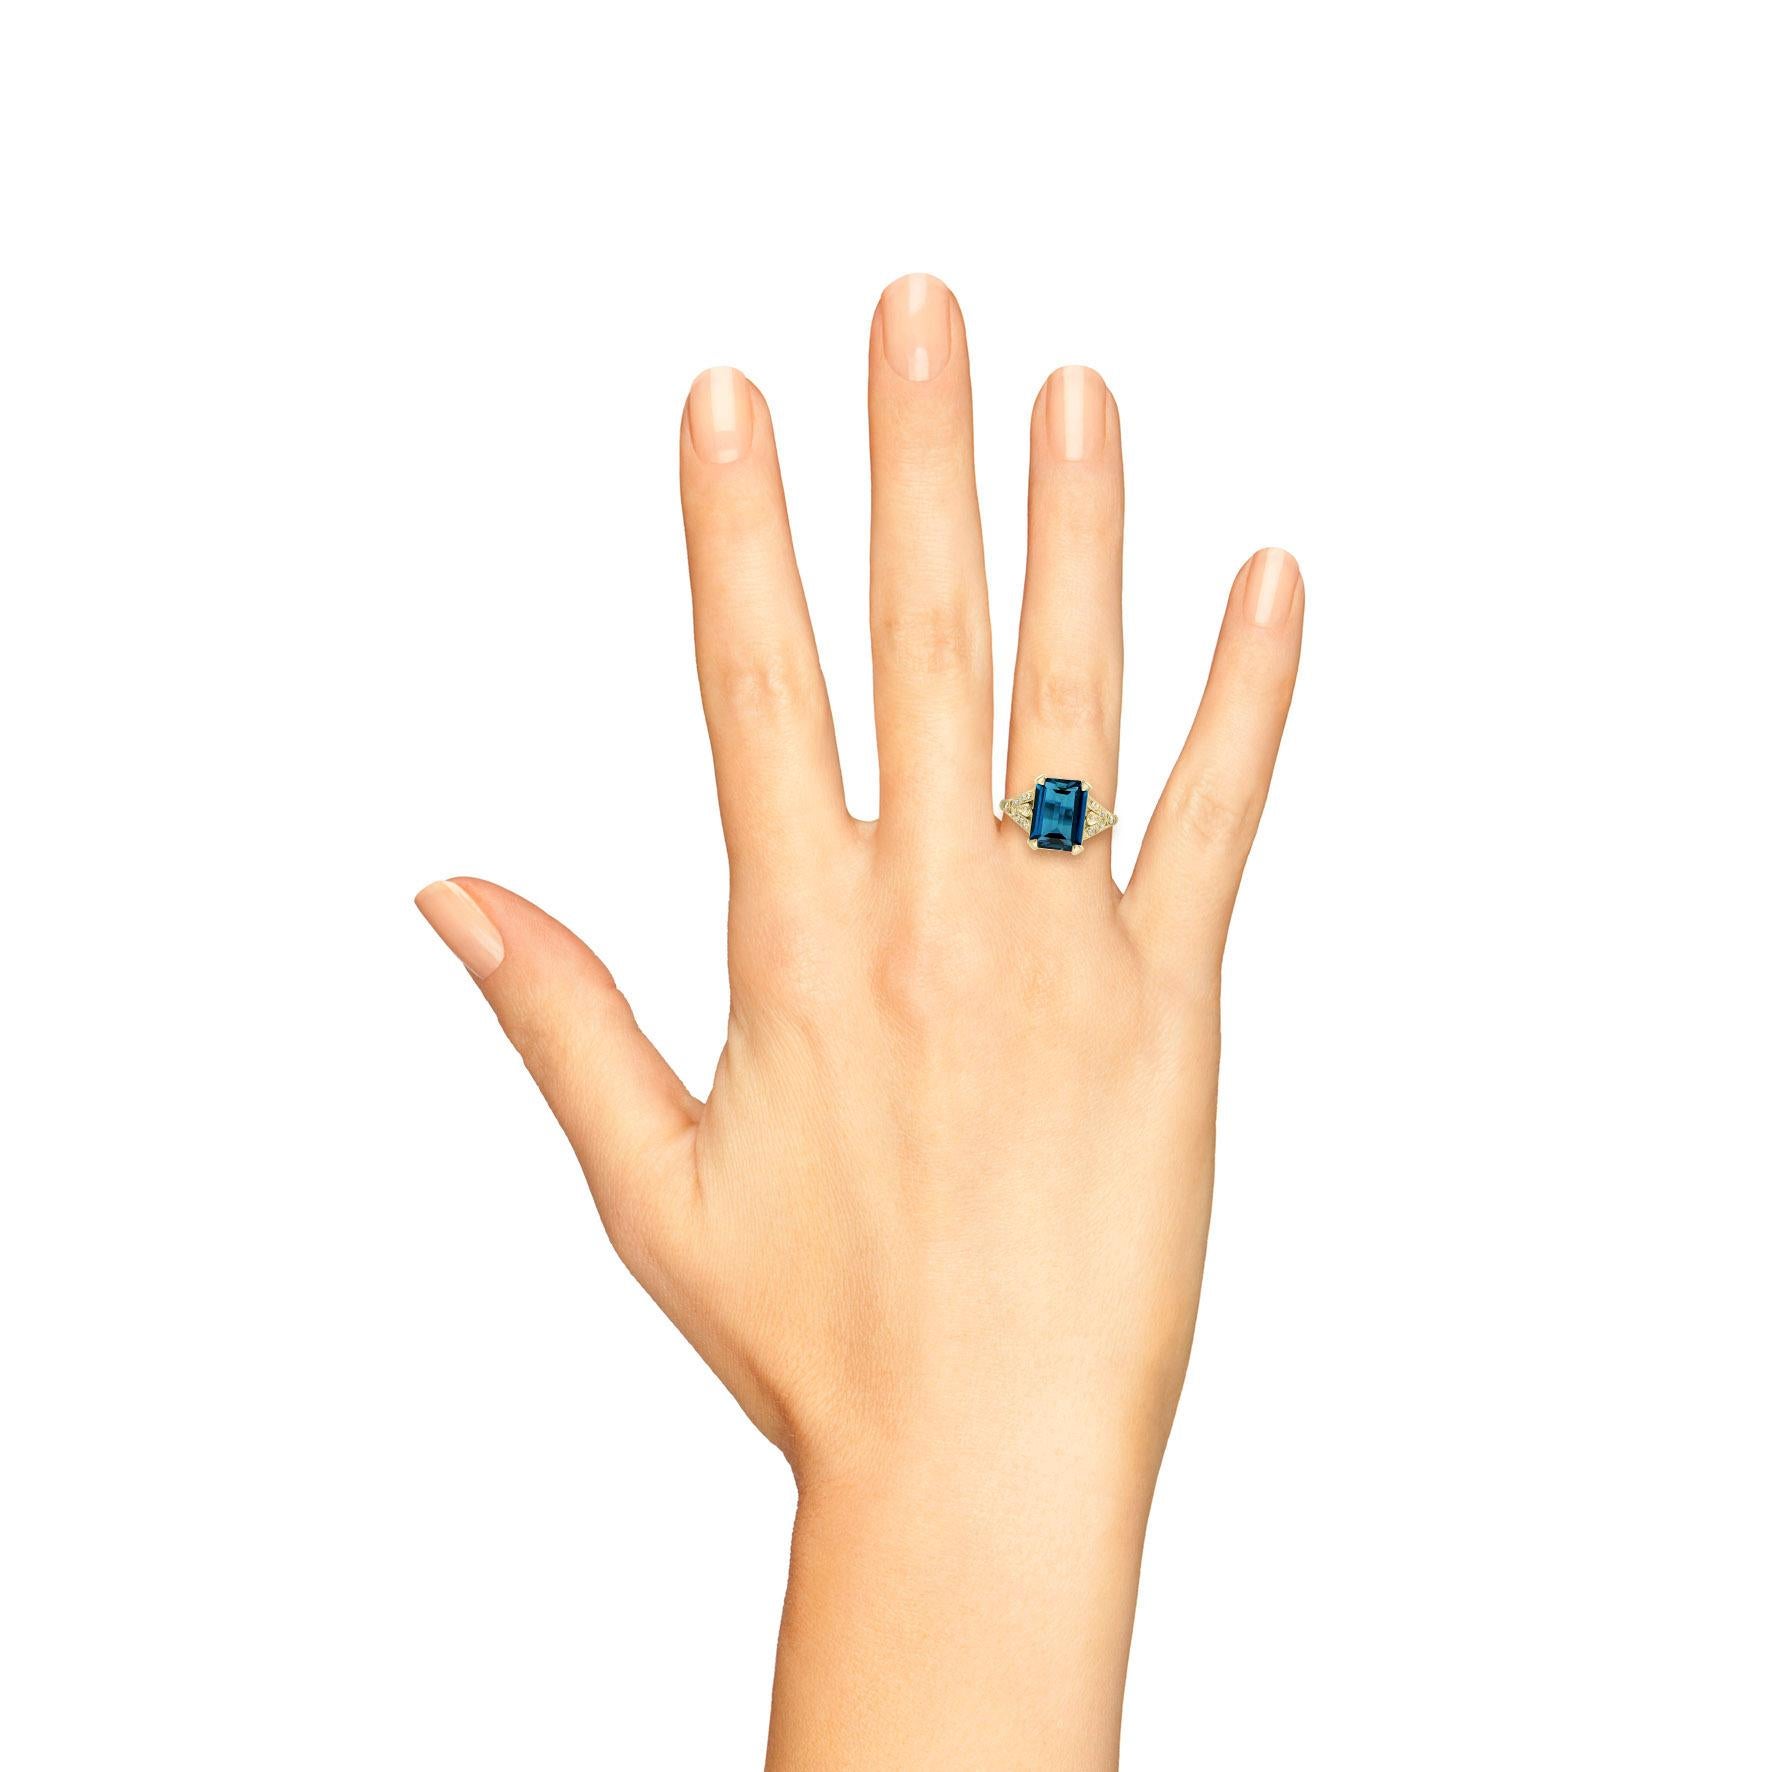 This spectacular London blue topaz Art Deco ring is a unique and glamorous vintage inspired piece. This ring features a beautiful emerald cut London blue topaz with a glittering white diamonds on its shoulders. Crafted in 14k yellow gold. It would